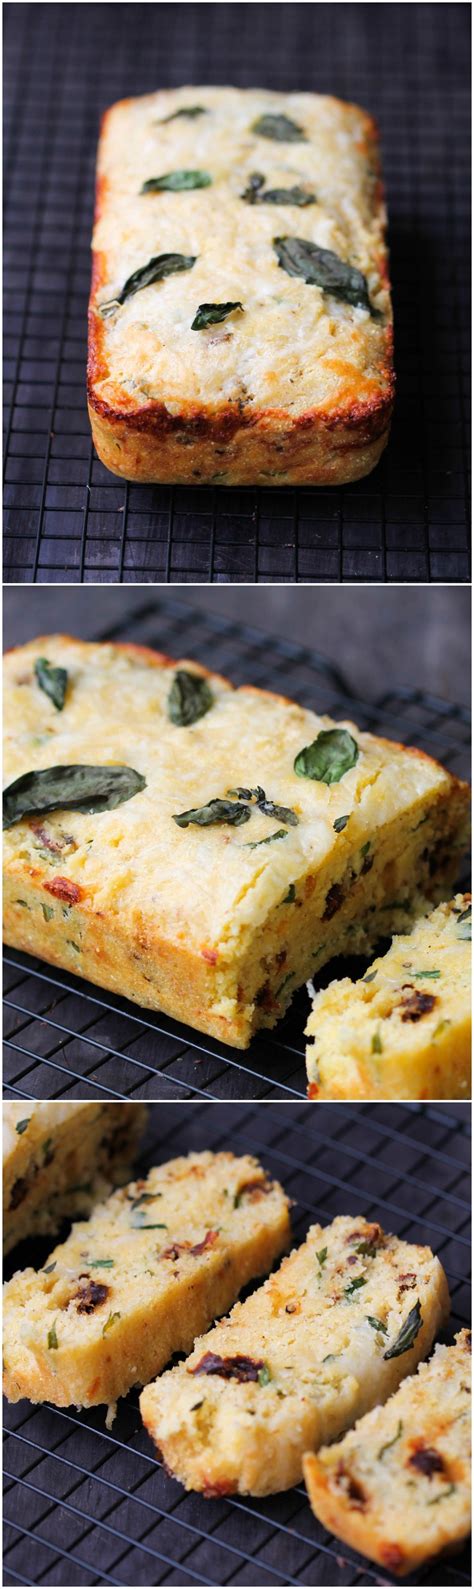 Cornbread is like coconut macaroons. Cooking Corn Bread With Corn Grits - Creamy Cheesy Corn Grits - Katie's Cucina / If you try this ...